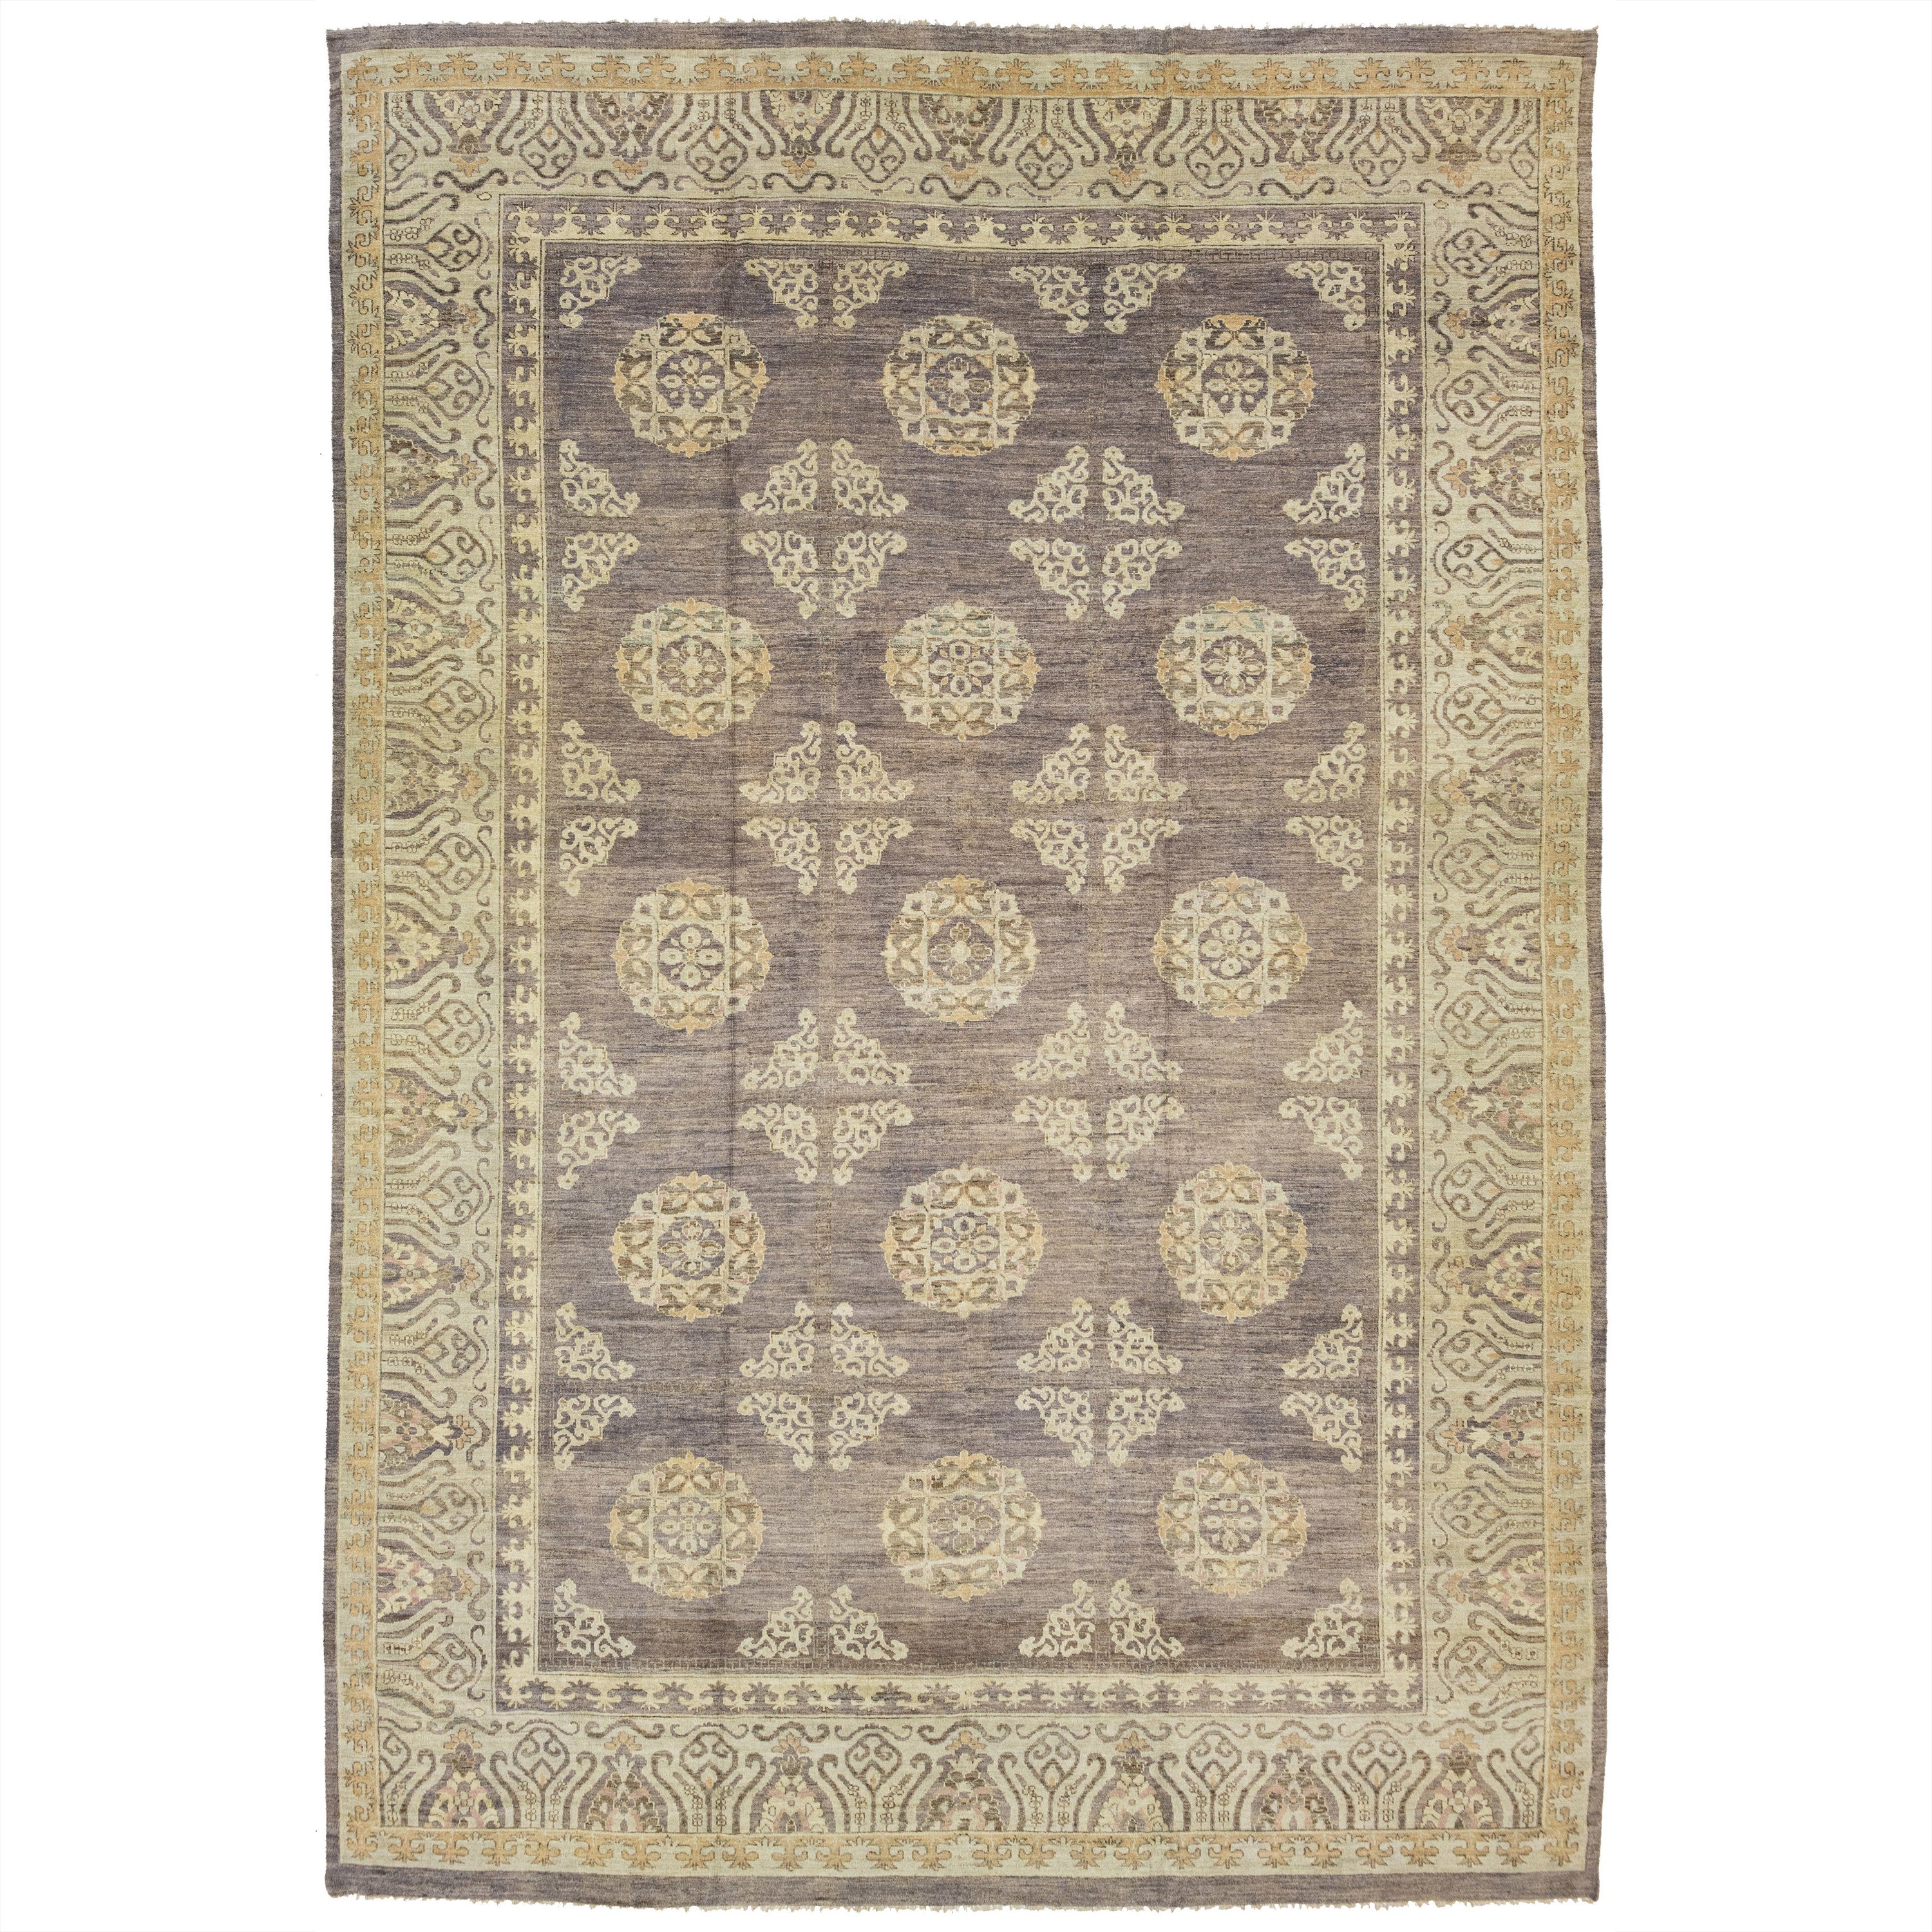 Allover Designed Modern Khotan Wool Rug Handmade In Brown and Blue Field Colors  For Sale